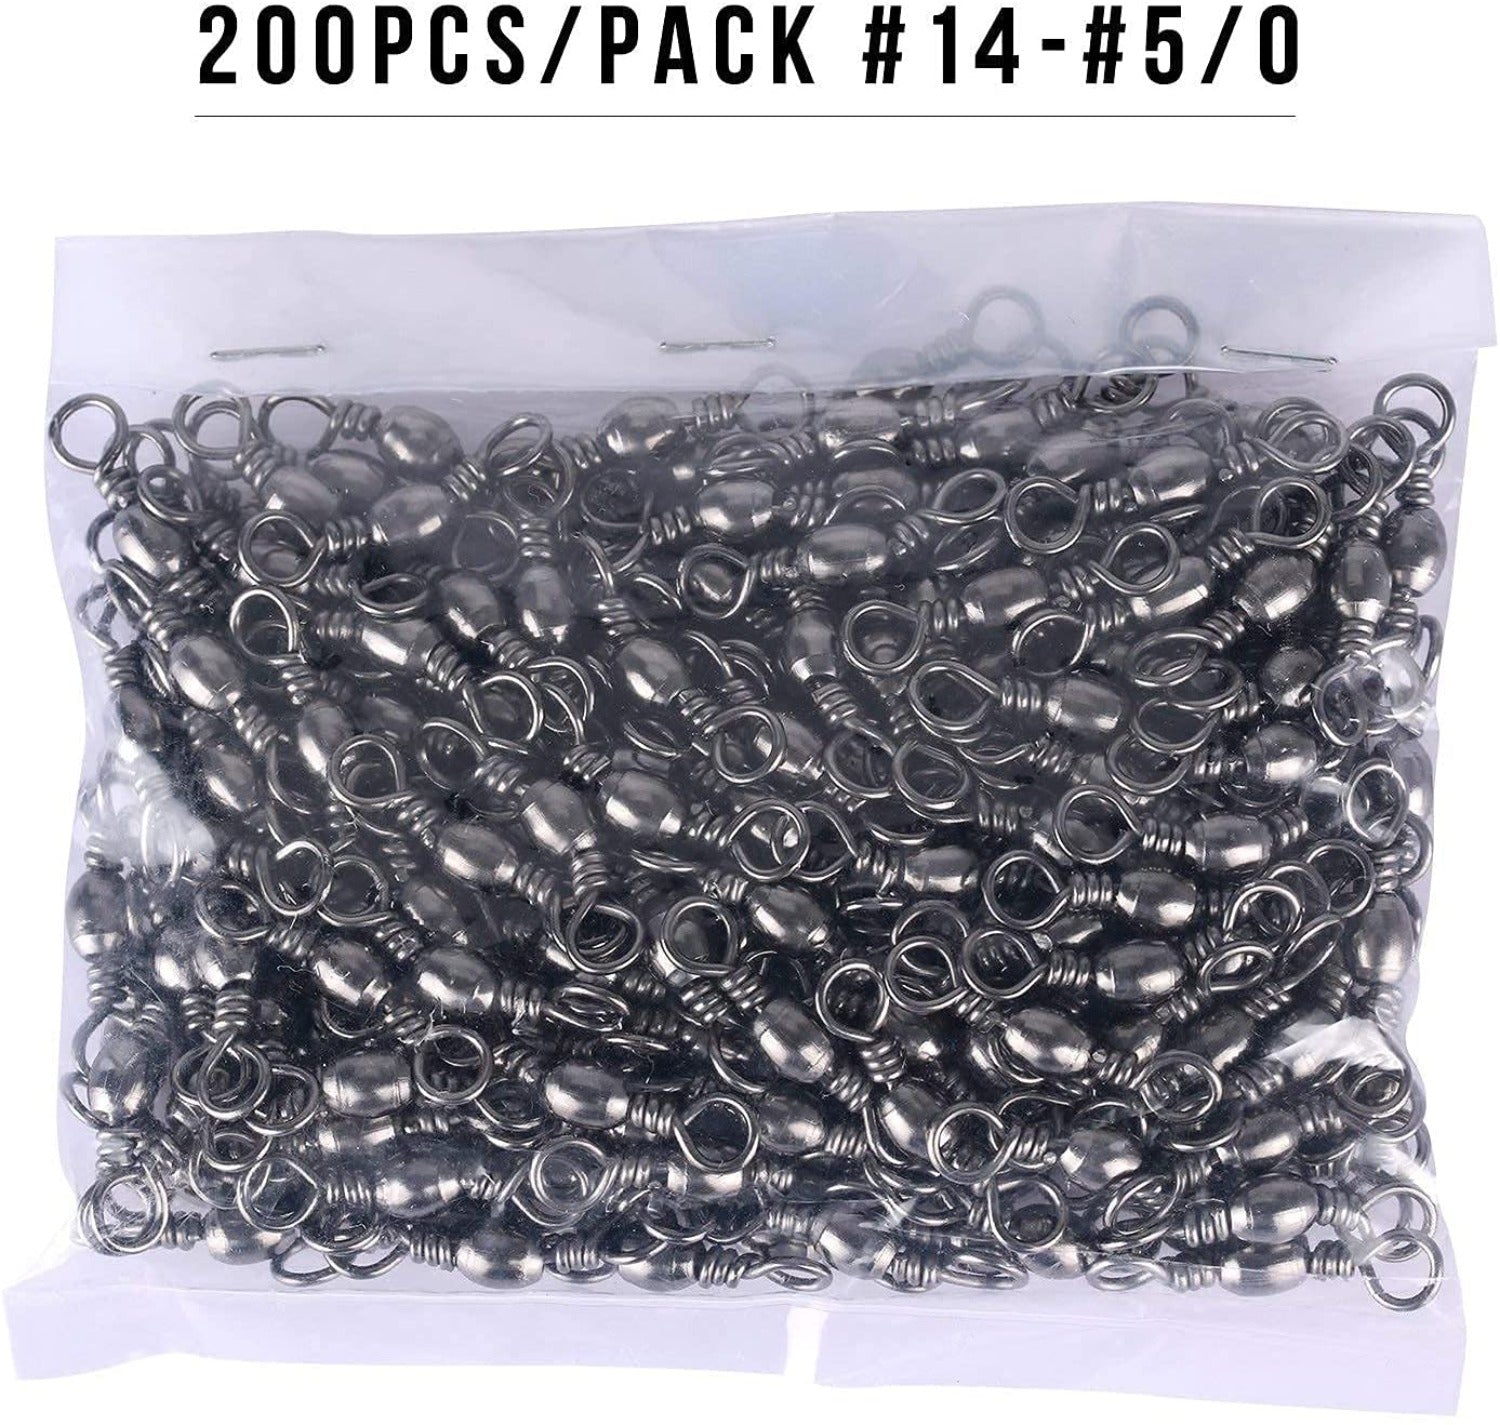 Goture Rolling Ball Bearing Fishing Swivel, 200PCS High Strength Stain –  GOTURE